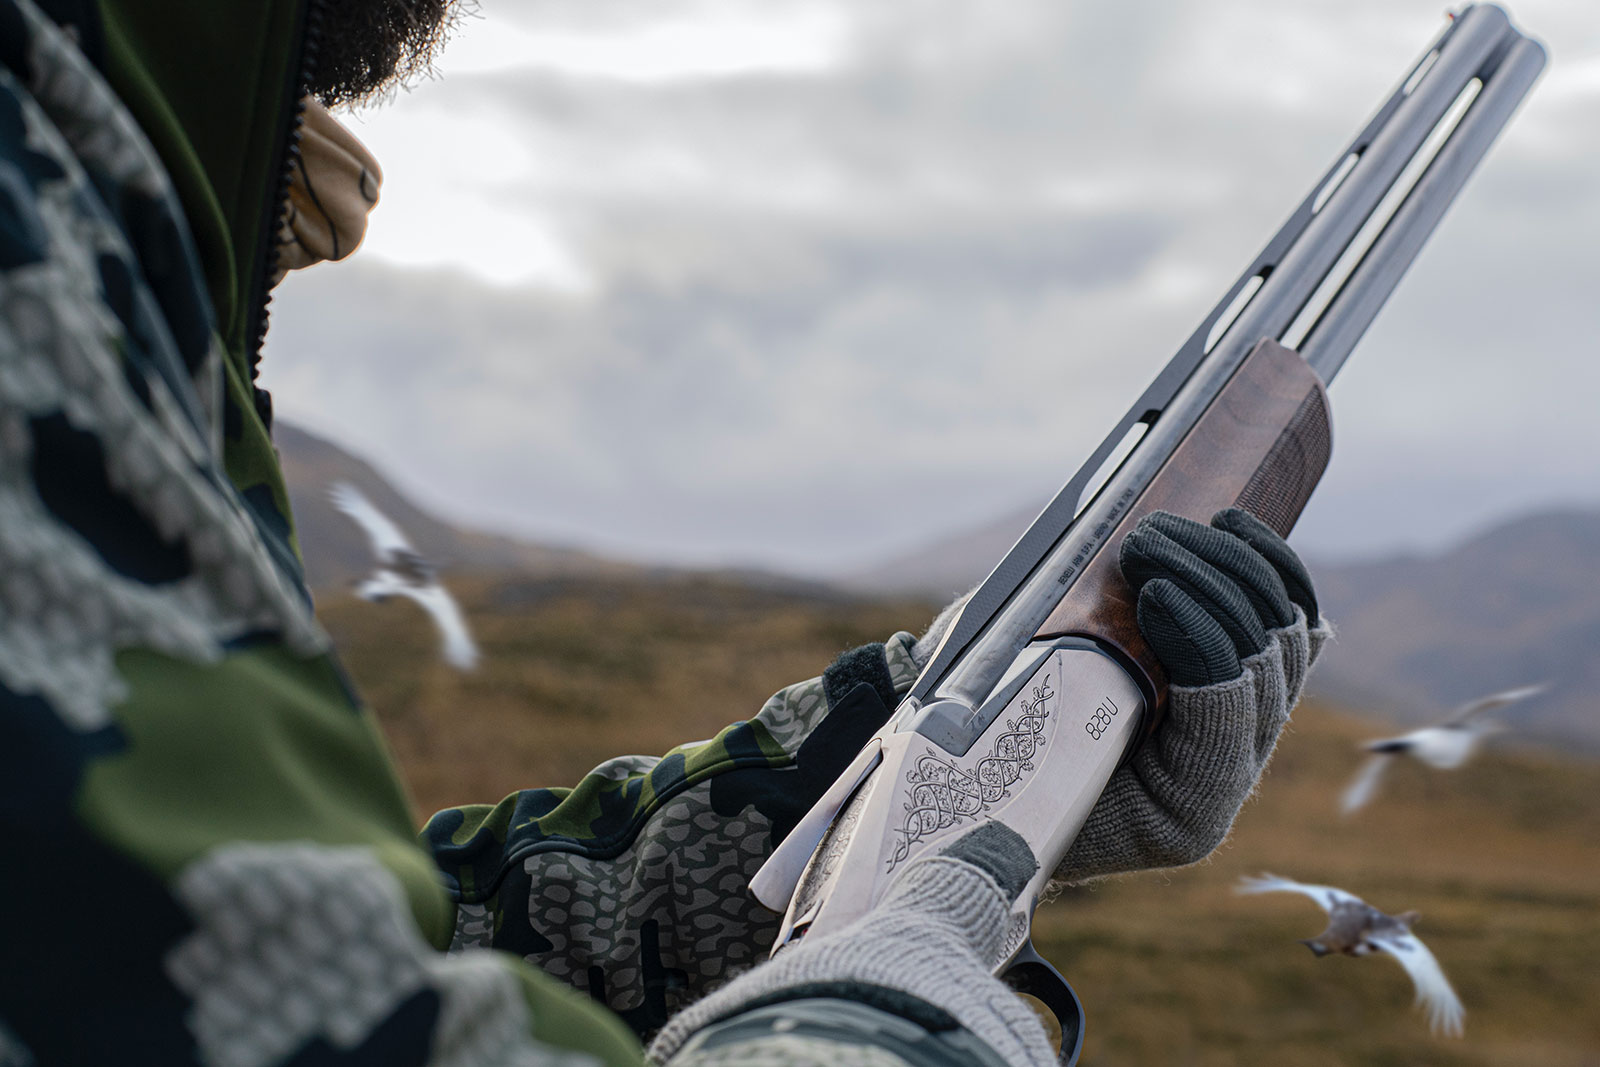 Donnie Vincent in position to shoot with Benelli’s 828 U over under 12-gauge shotgun while hunting ptarmigan in the open fields on Adak Island, Alaska.